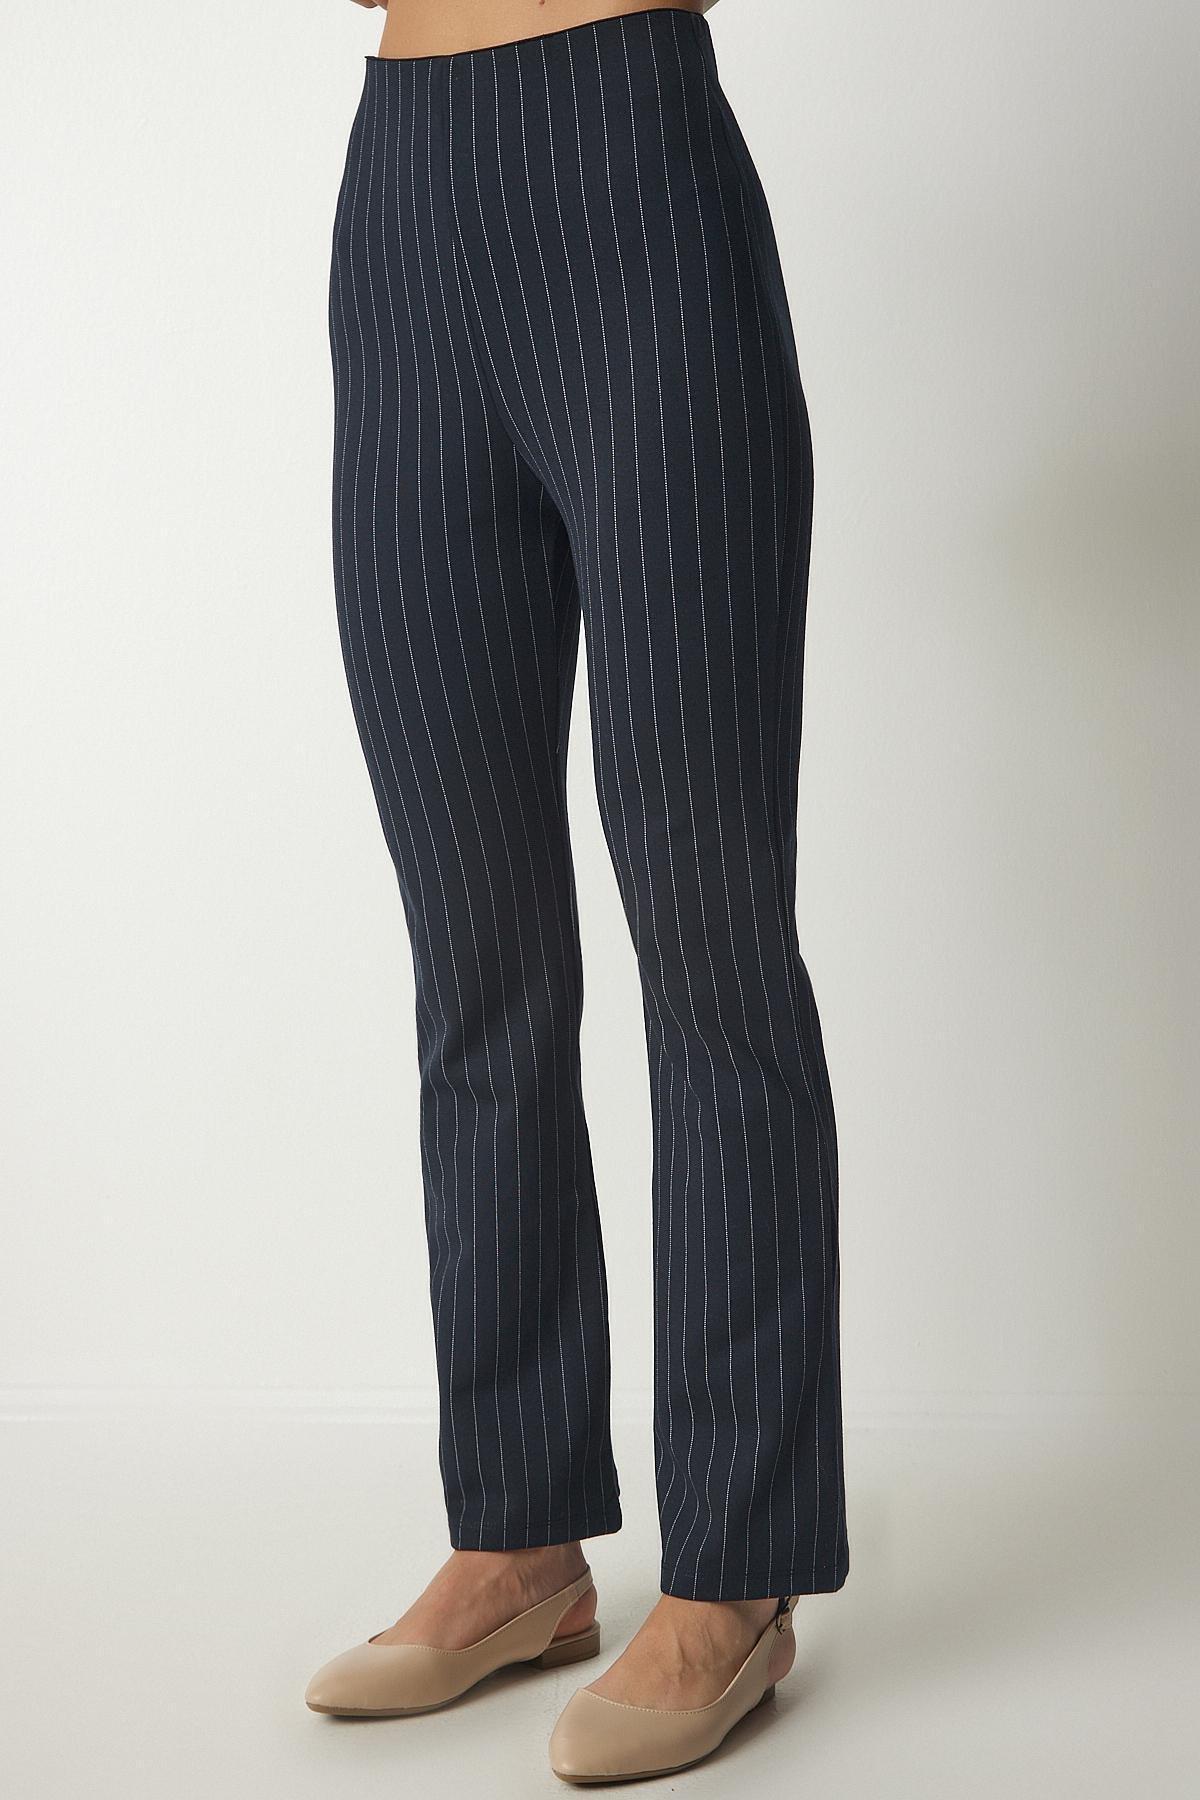 Happiness Istanbul - Navy Striped Casual Pants